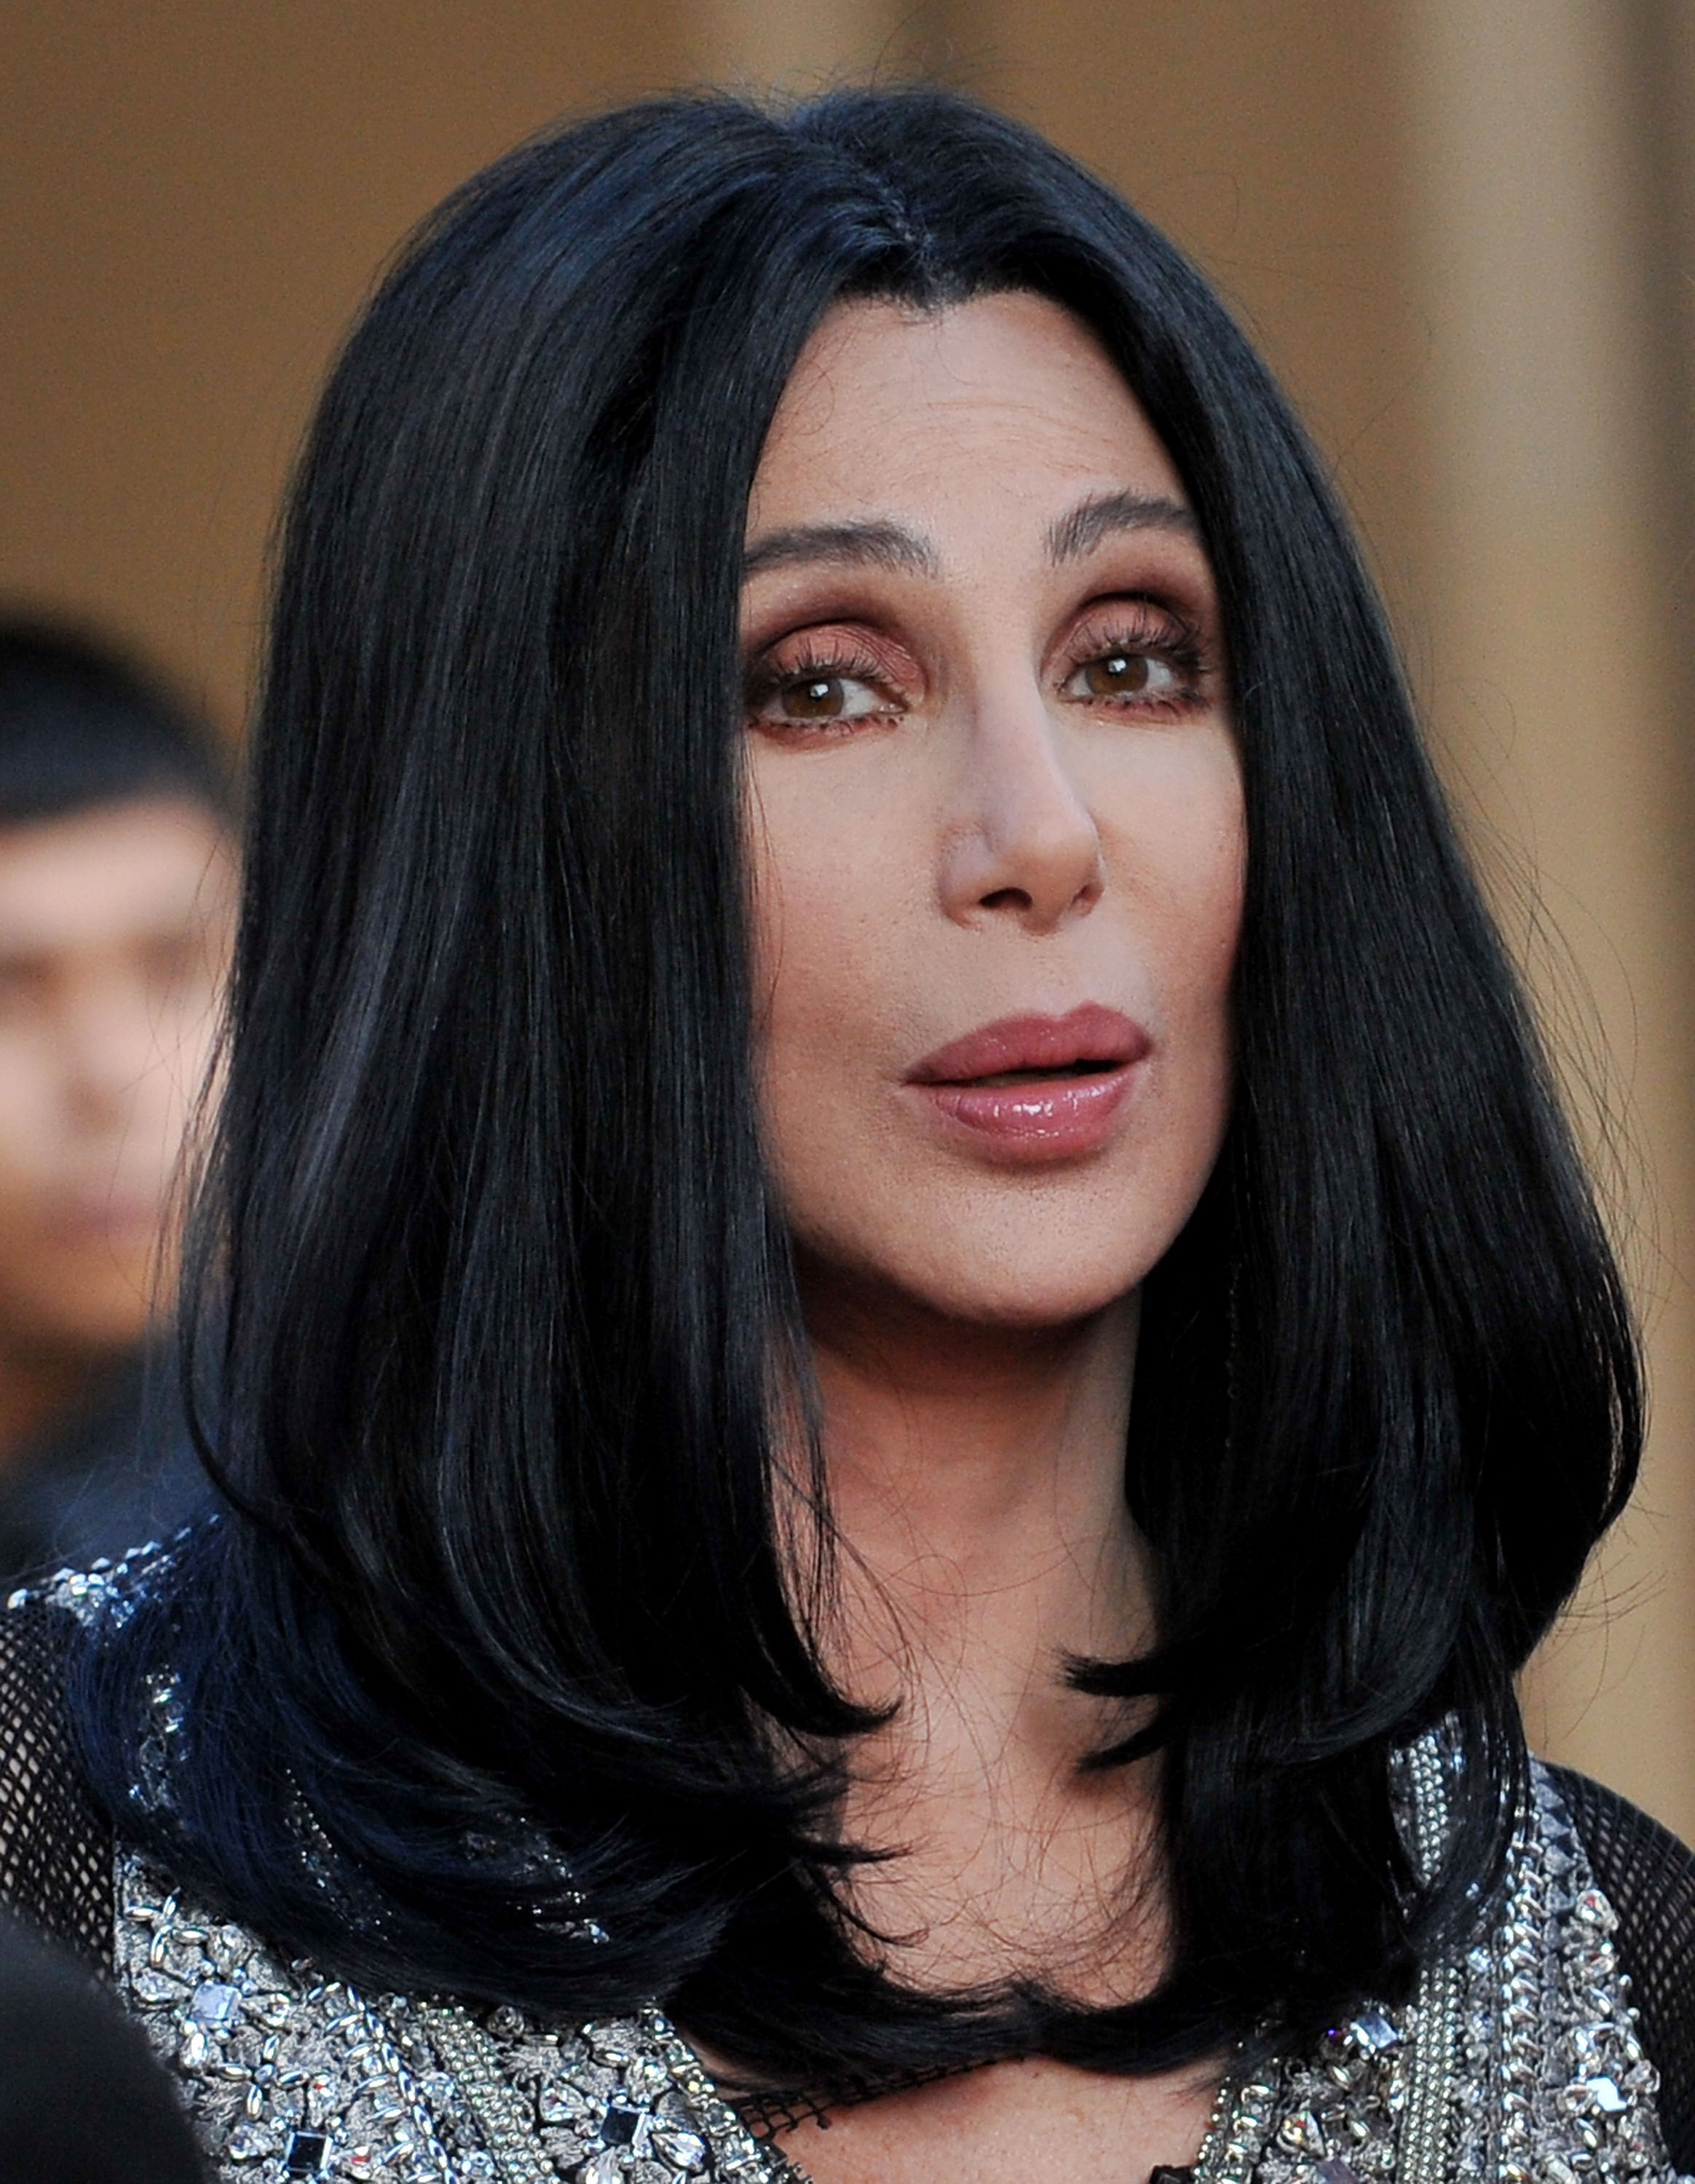 Cher at the AFI Life Achievement Awards in Los Angeles, California on June 10, 2010 | Source: Getty Images